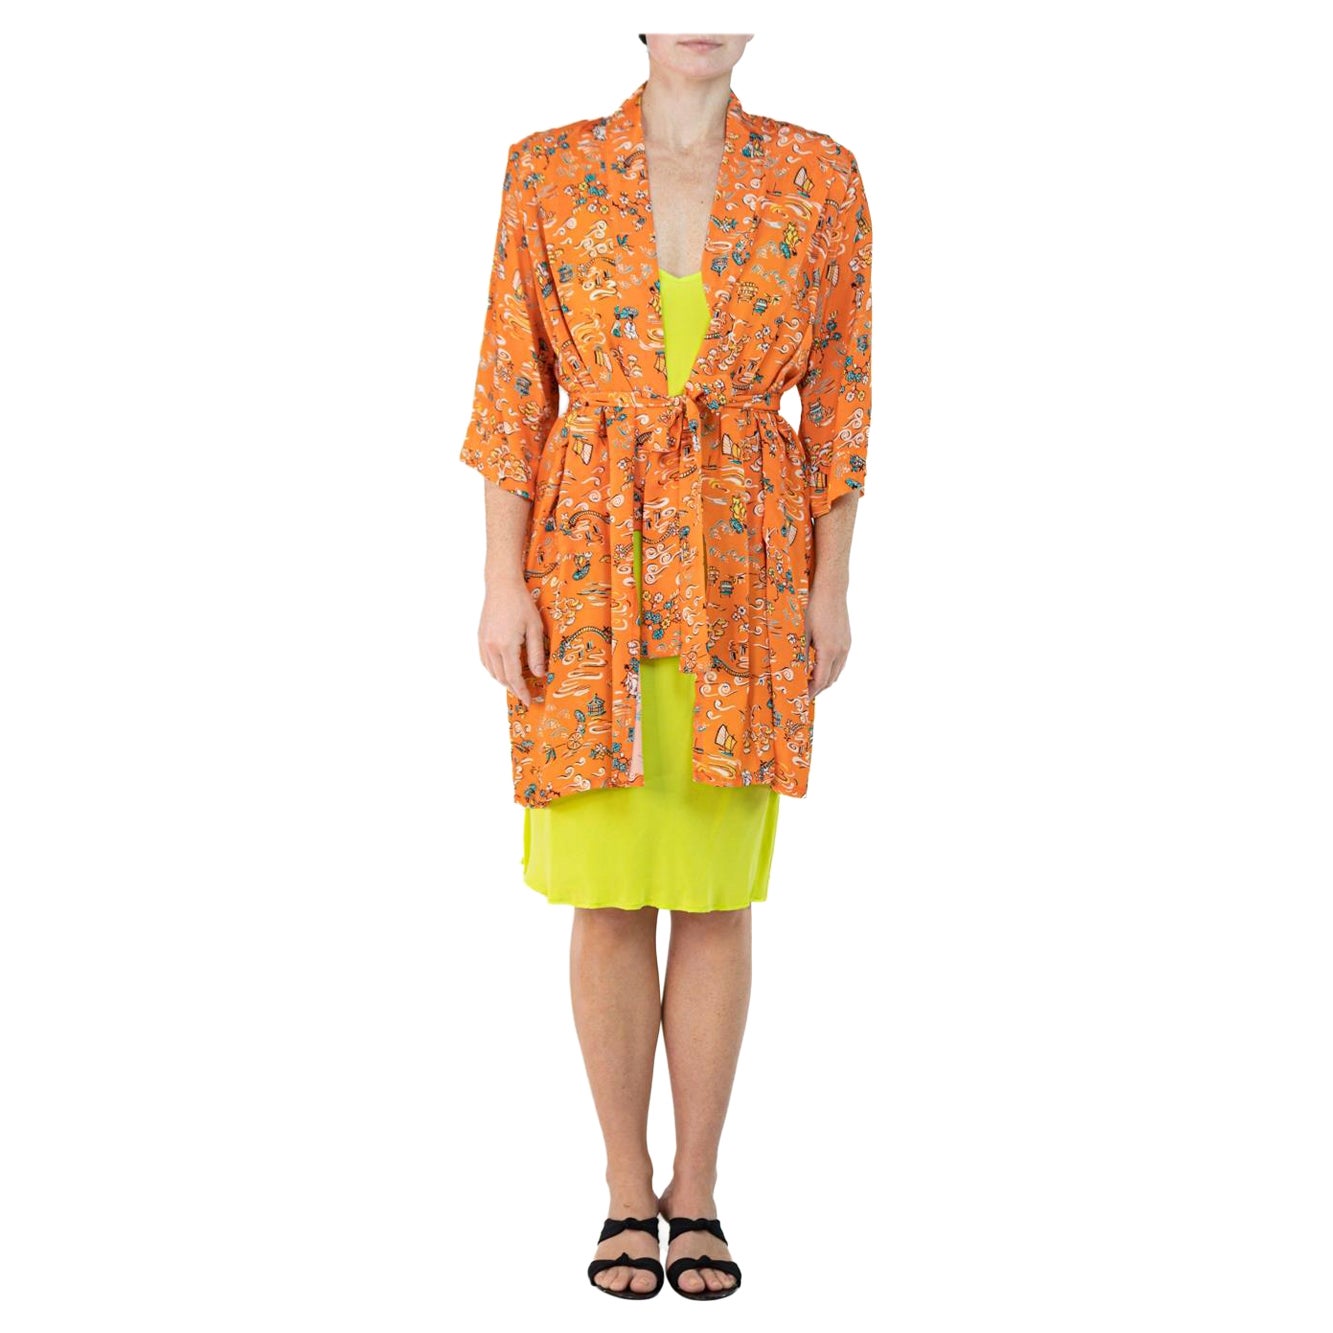 Morphew Collection Orange & Yellow Cherry Blossom Novelty Print Cold Rayon Bias For Sale